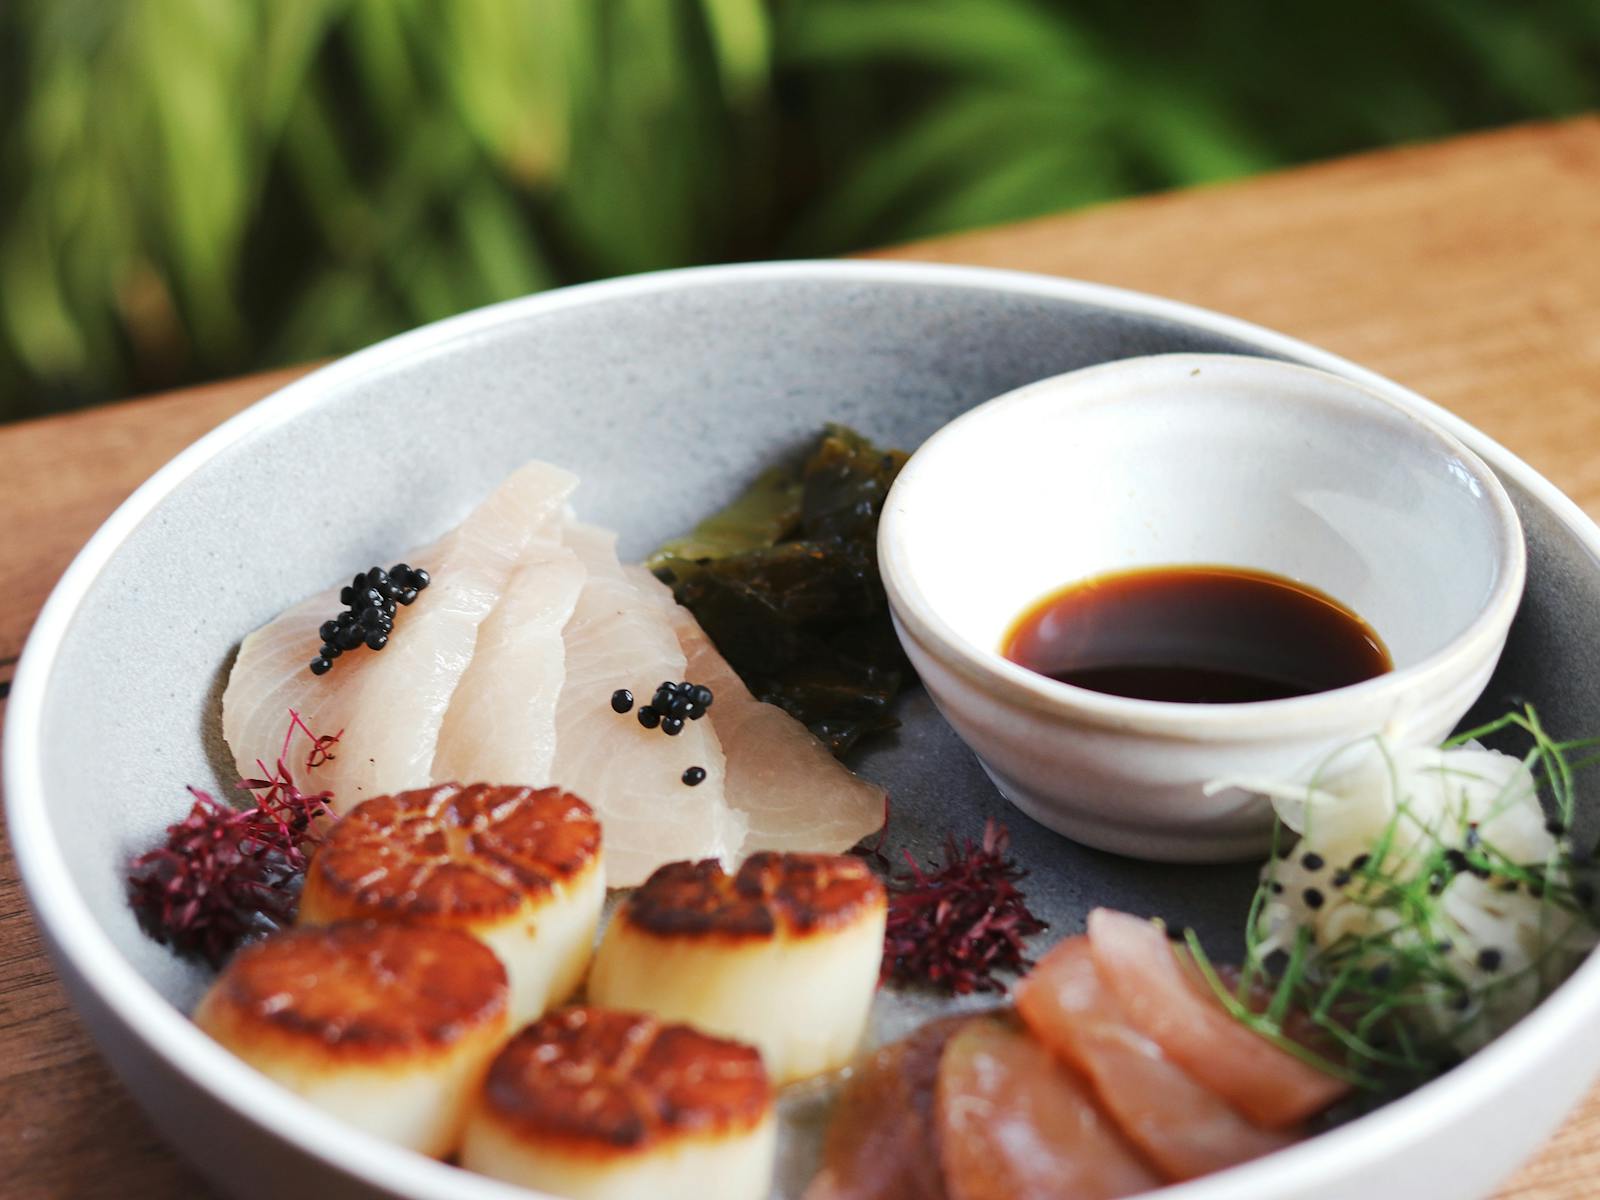 A bowl features scallops, kingfish, ocean trout with a small bowl of ponzu sauce